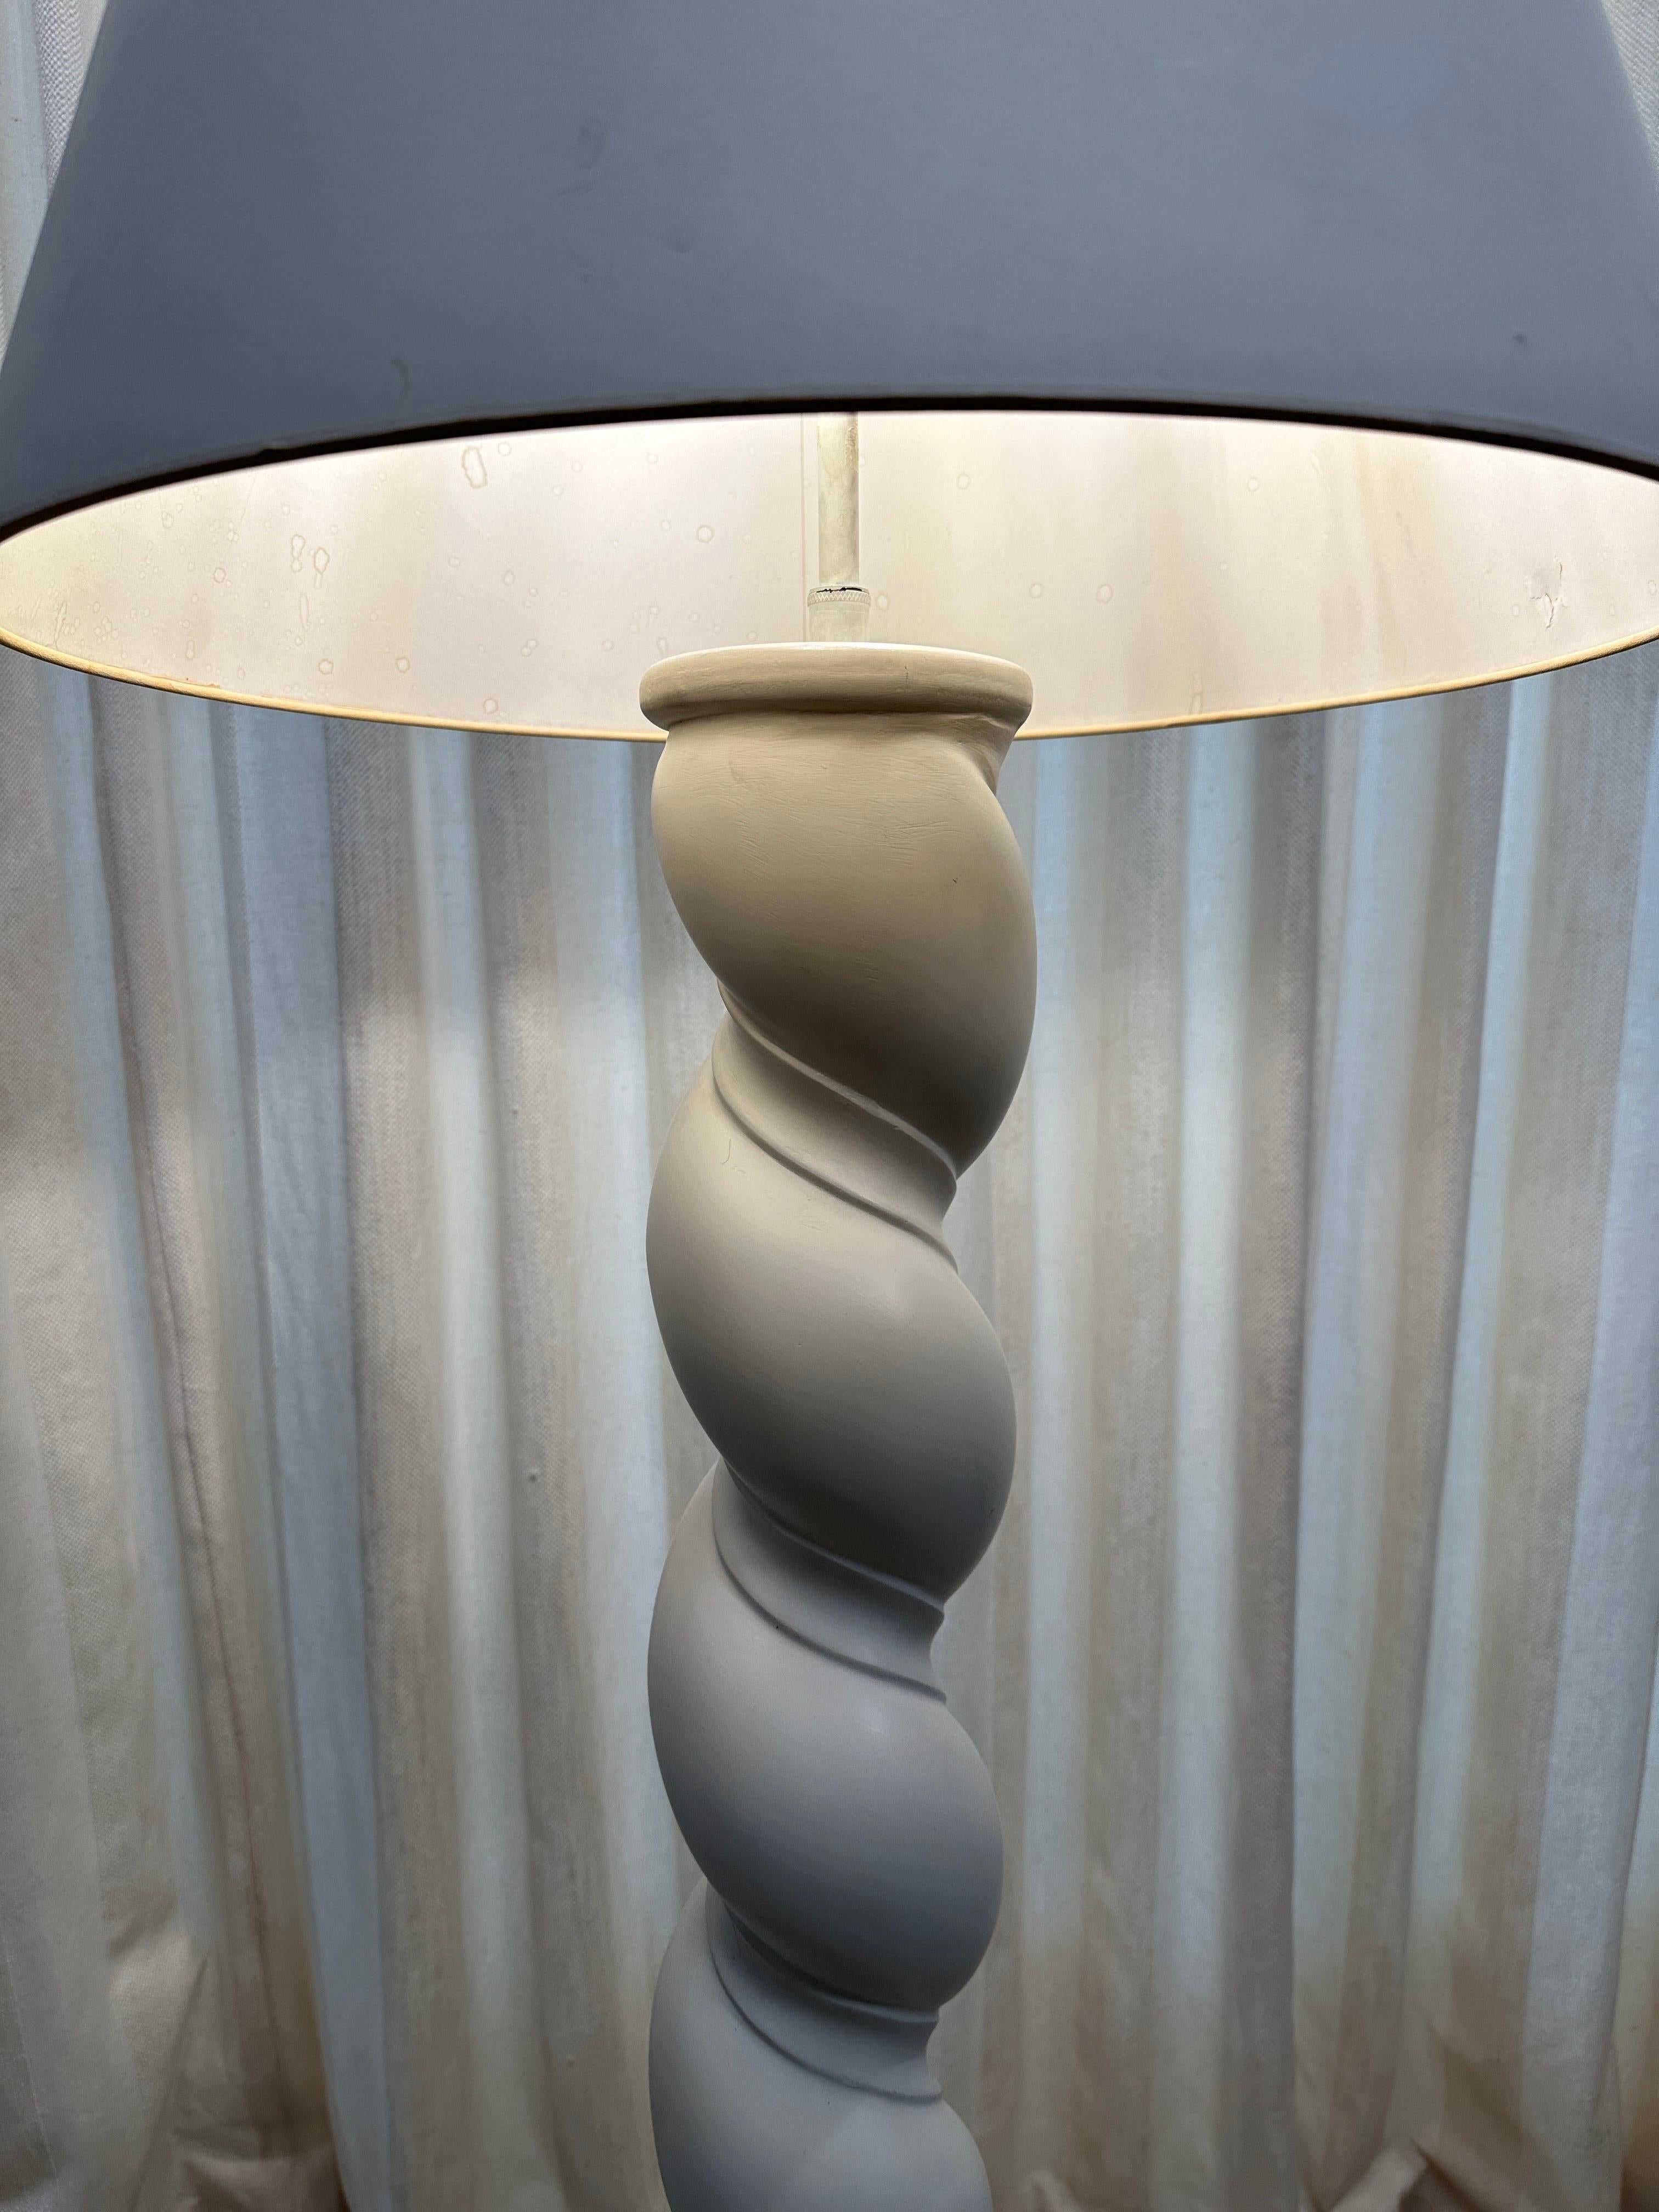 Late 20th Century Extremely Rare Composition Plaster Floor Lamp w/ Spiraling Design by Sirmos For Sale